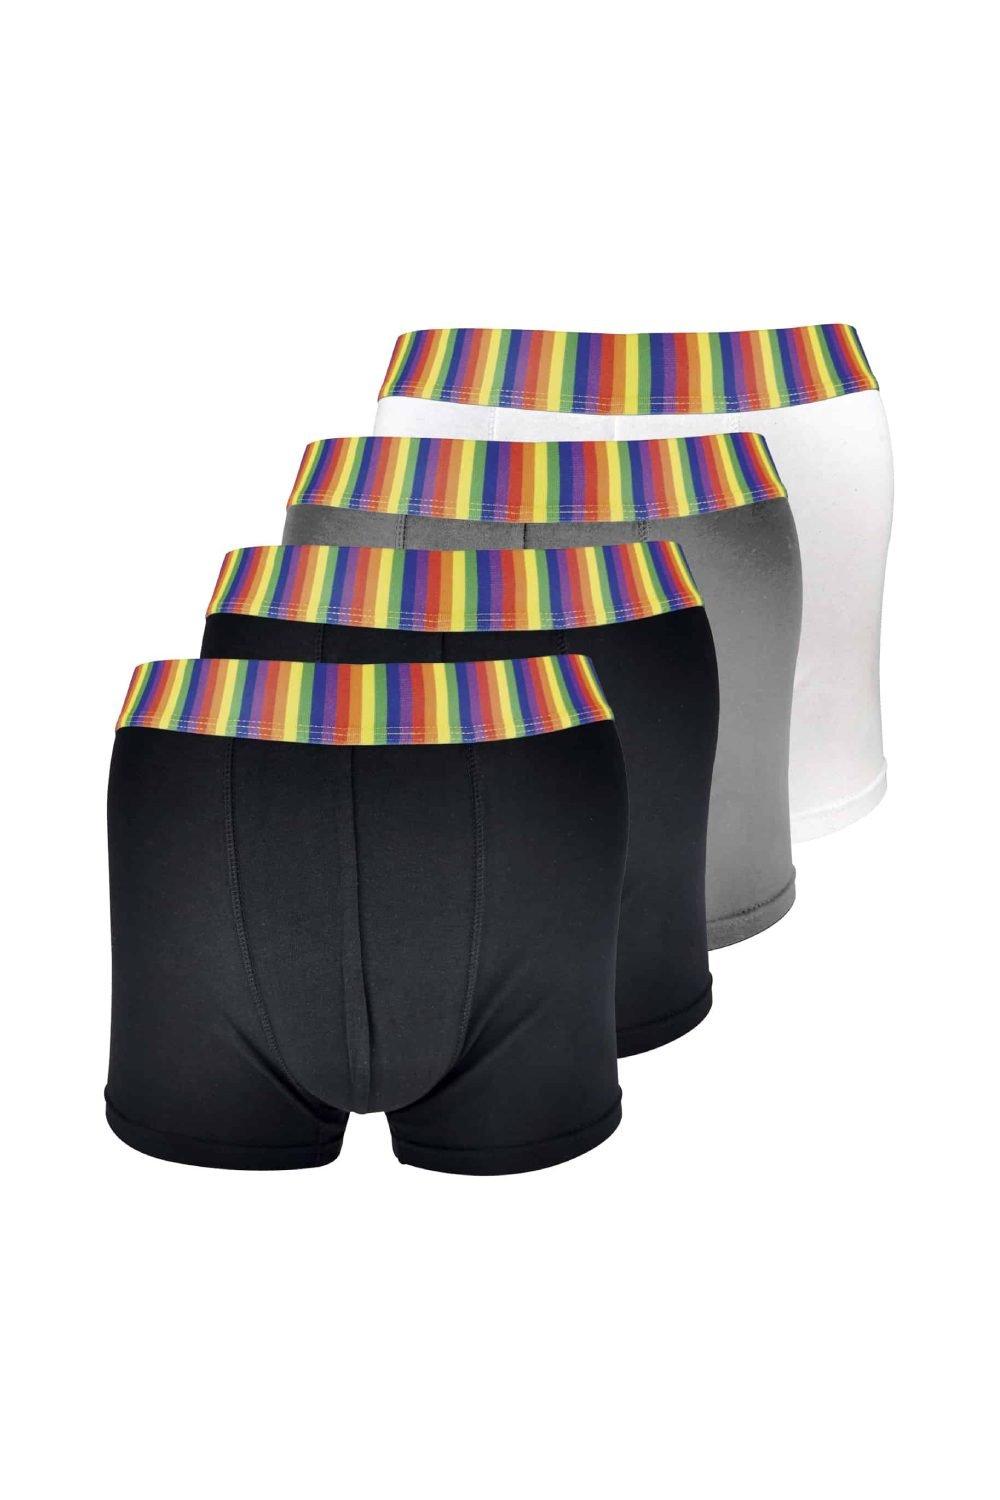 4 Pack Soft Cotton Novelty Striped Rainbow Boxer Shorts